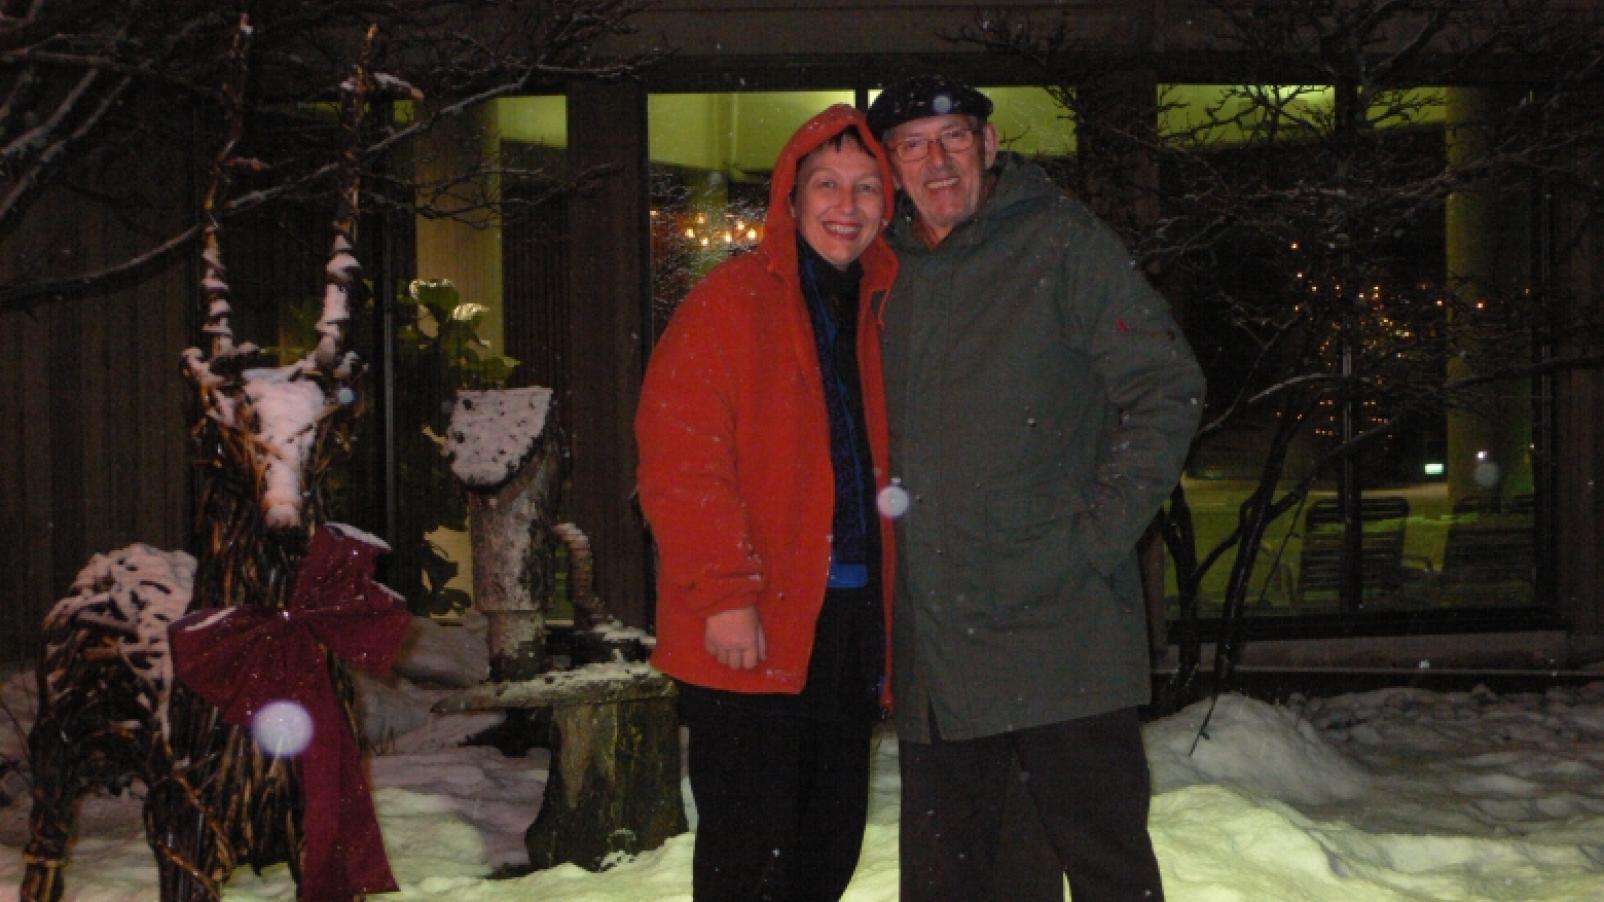 Kay and her husband Richard, posing outside at night in a snowy location.